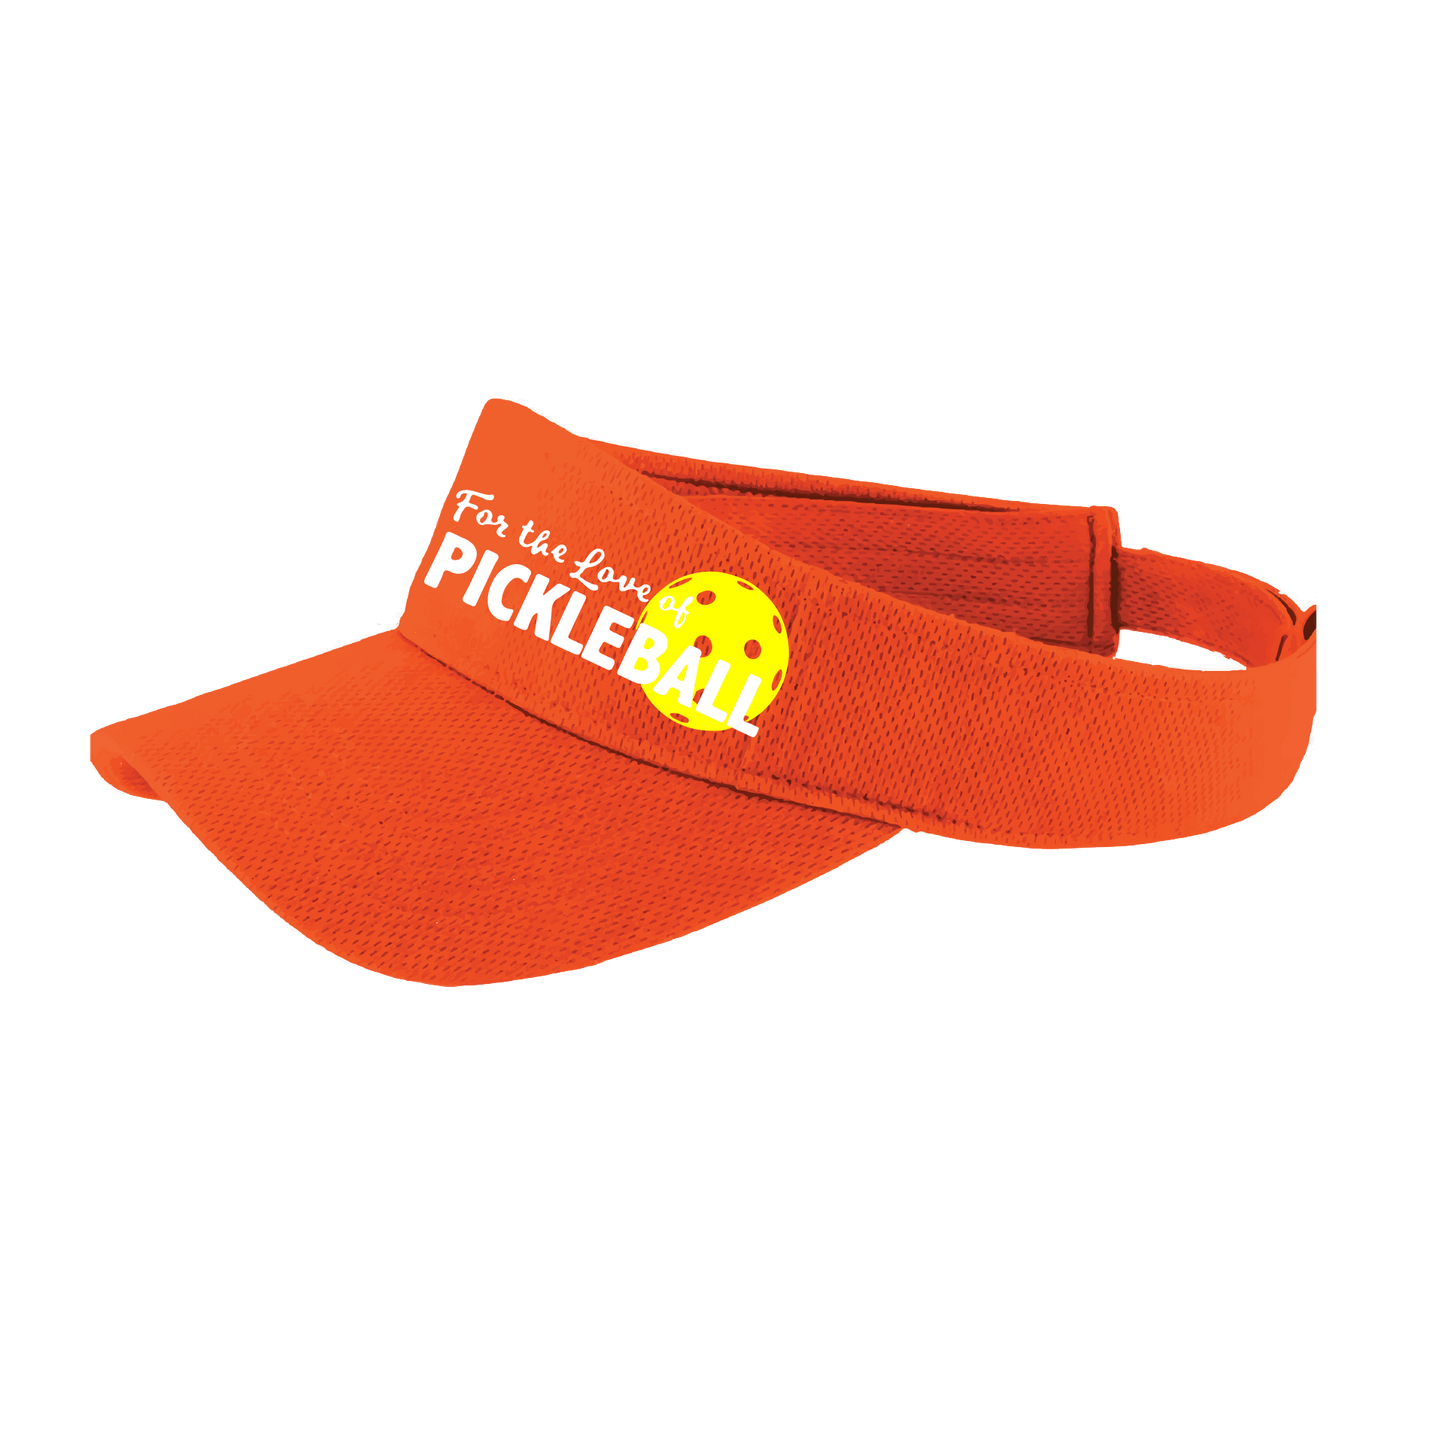 Pickleball Visor Design: For the Love of Pickleball  This fun pickleball visor is the perfect accessory for all pickleball players needing to keep their focus on the game and not the sun. The moisture-wicking material is made of 100% polyester with closed-hole flat back mesh and PosiCharge Technology. The back closure is a hock and loop style made to adjust to every adult.